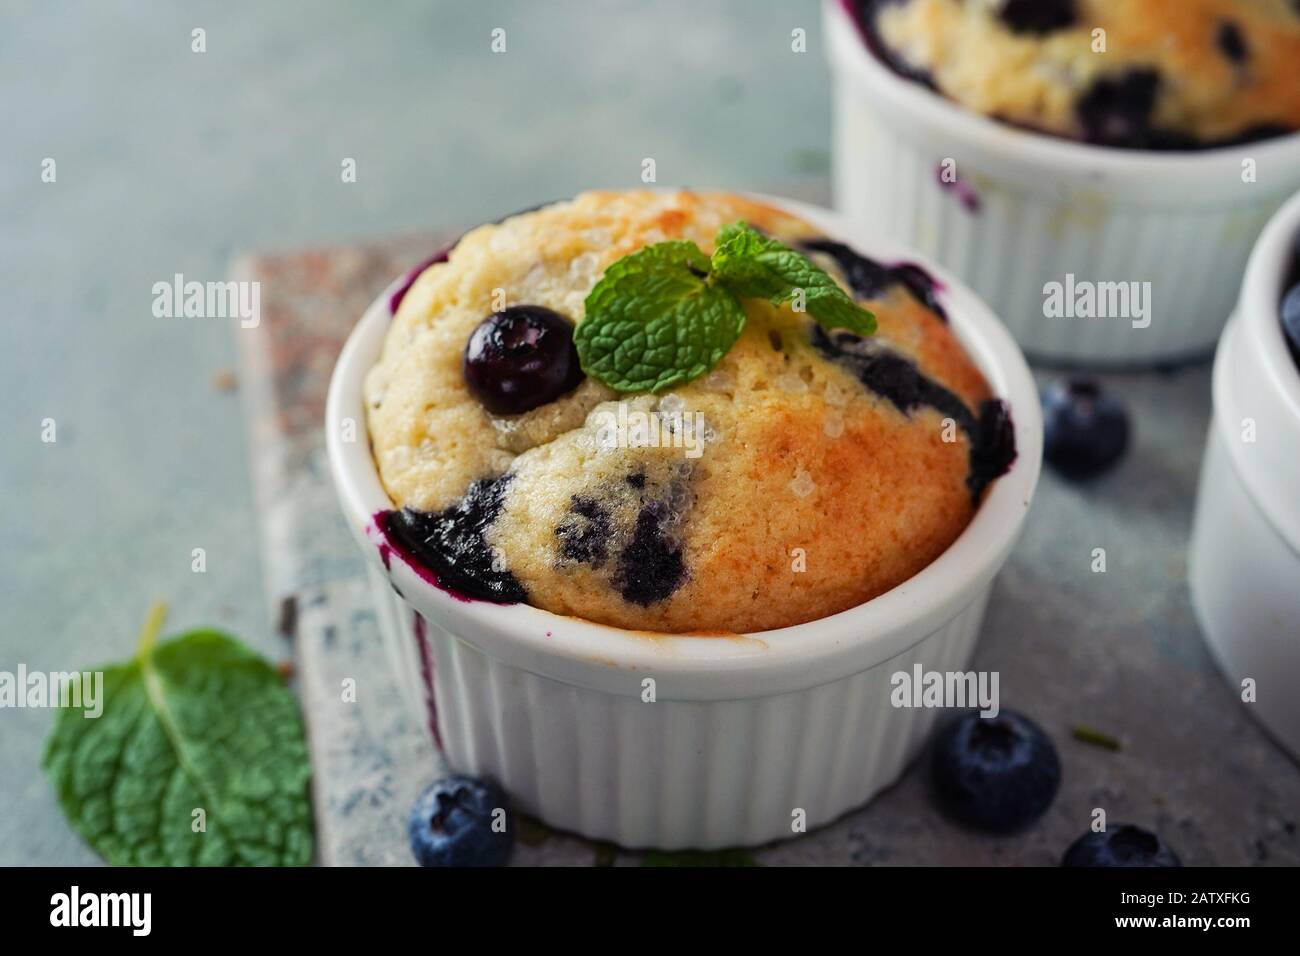 Homemade Blueberry Muffin for one baked in a ramekin, selective focus Stock Photo